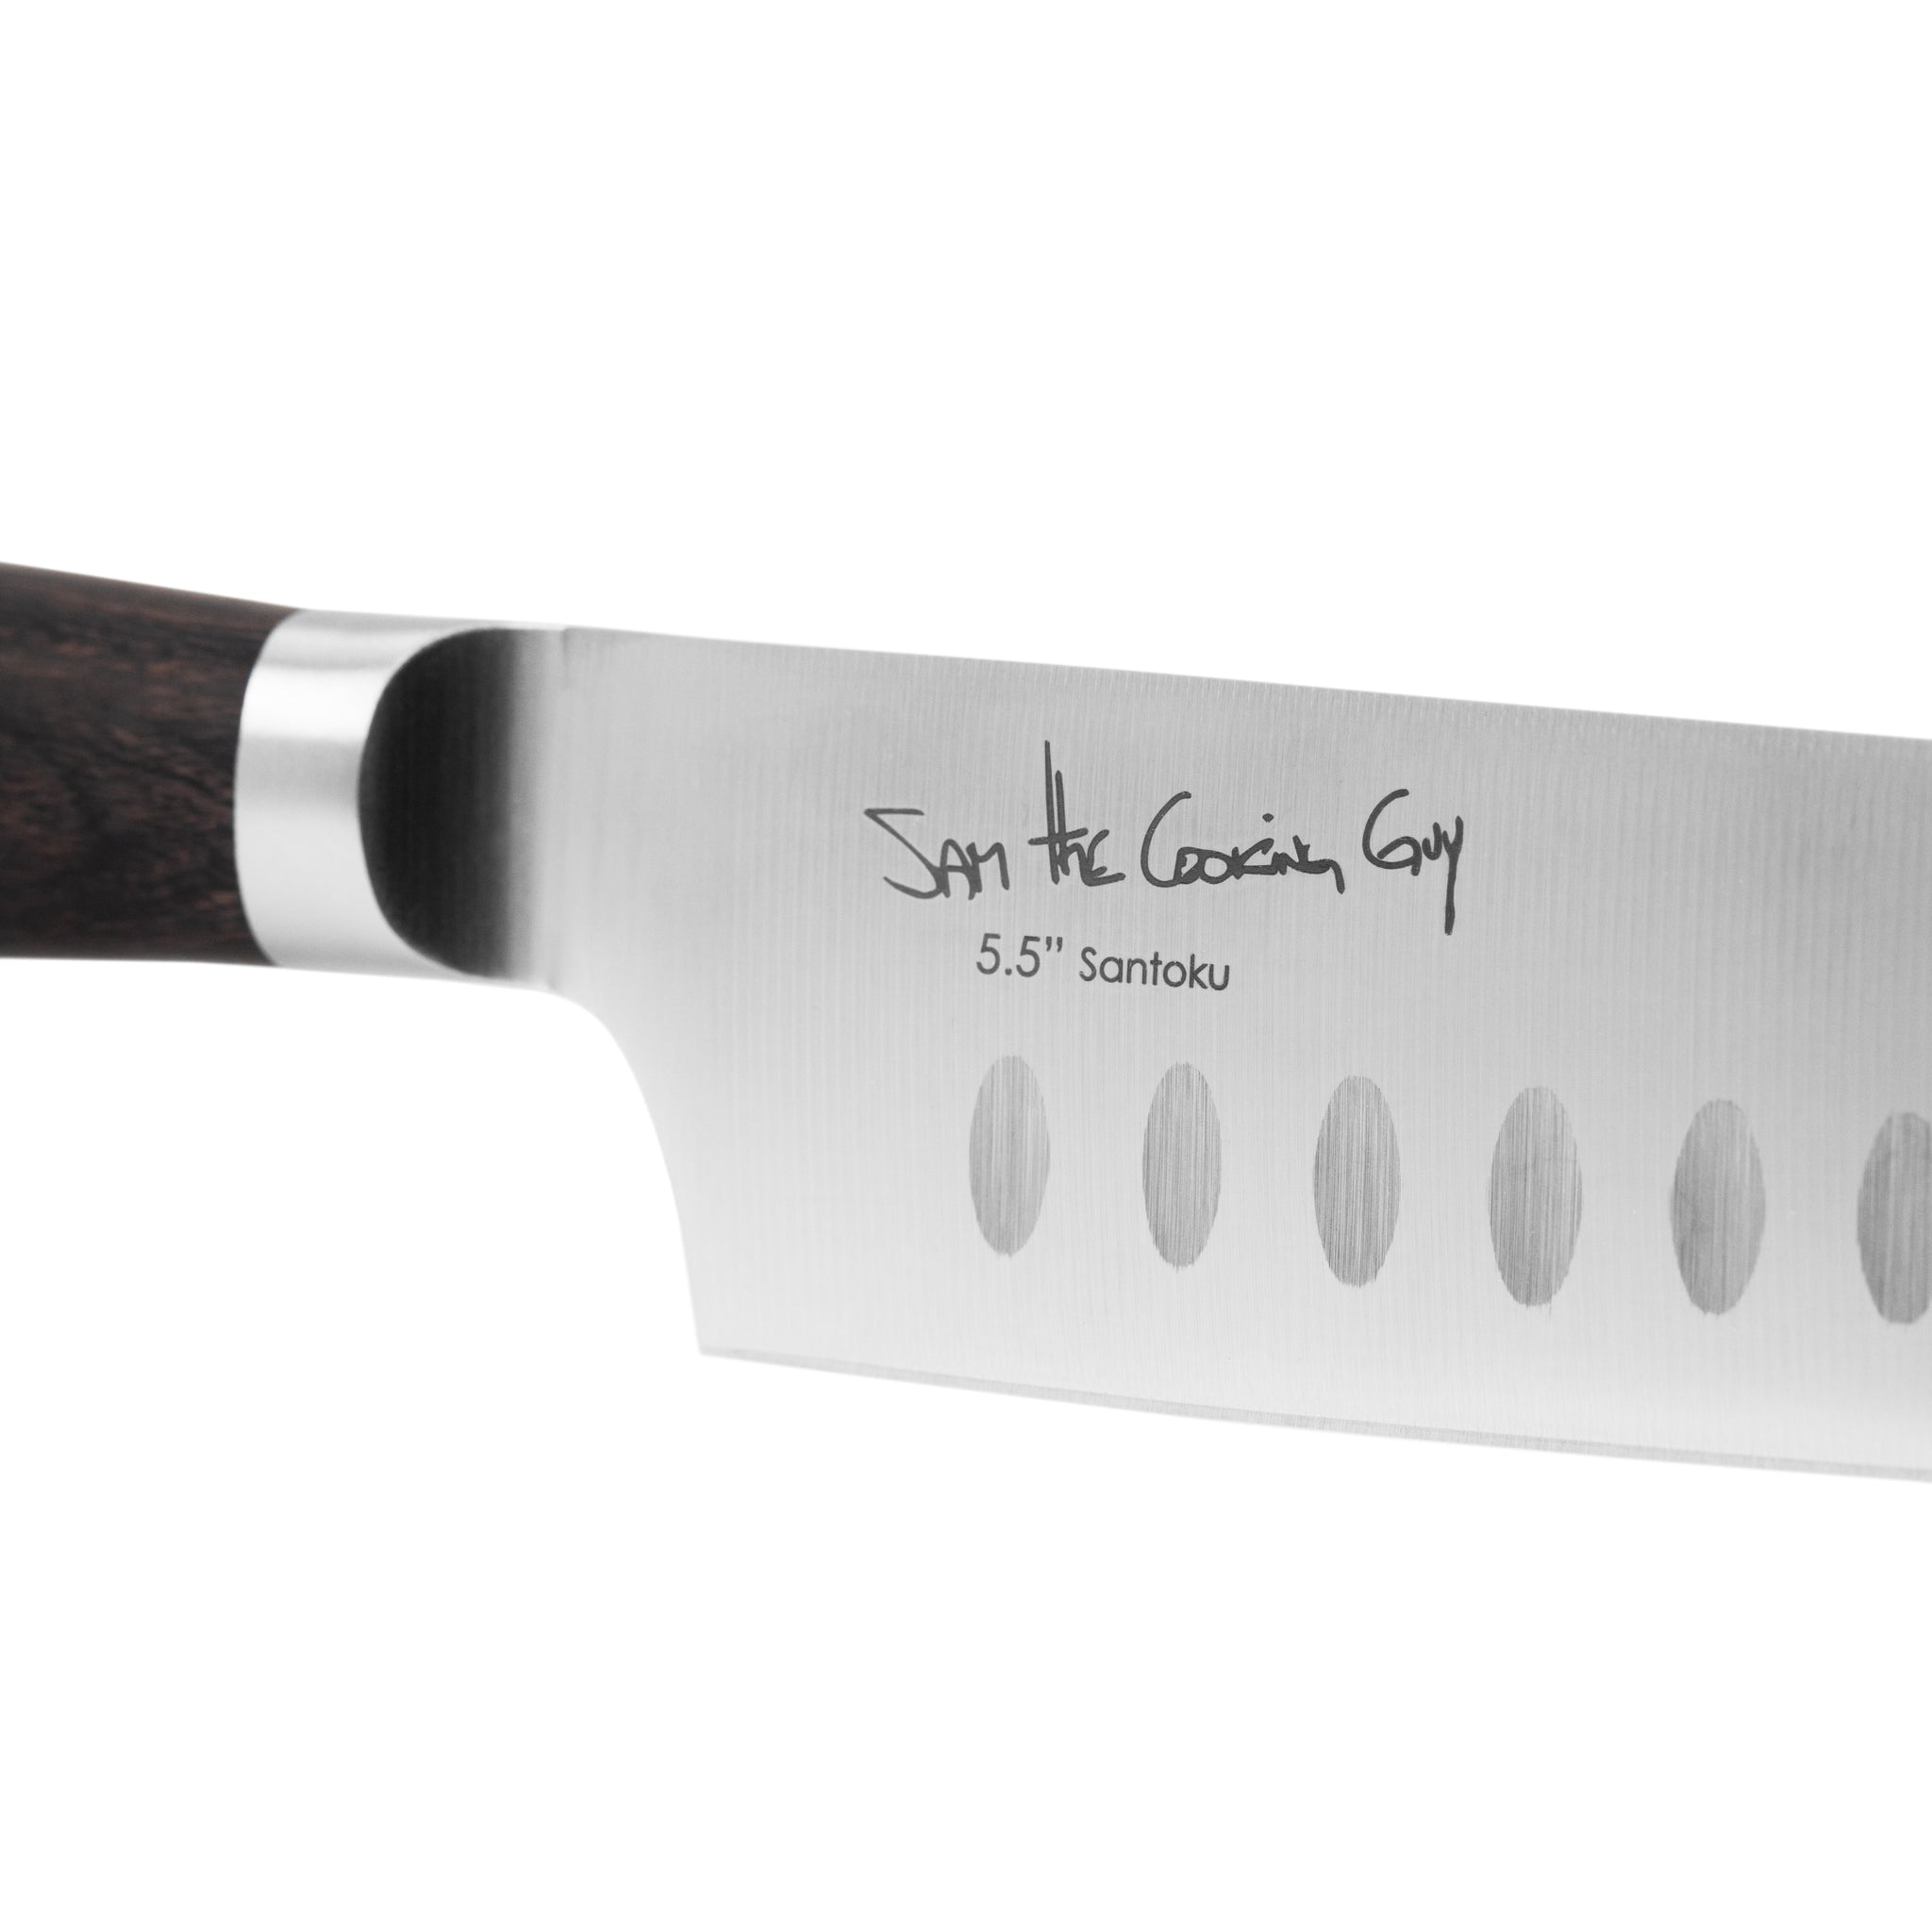 Sam the cooking guy's knife review 